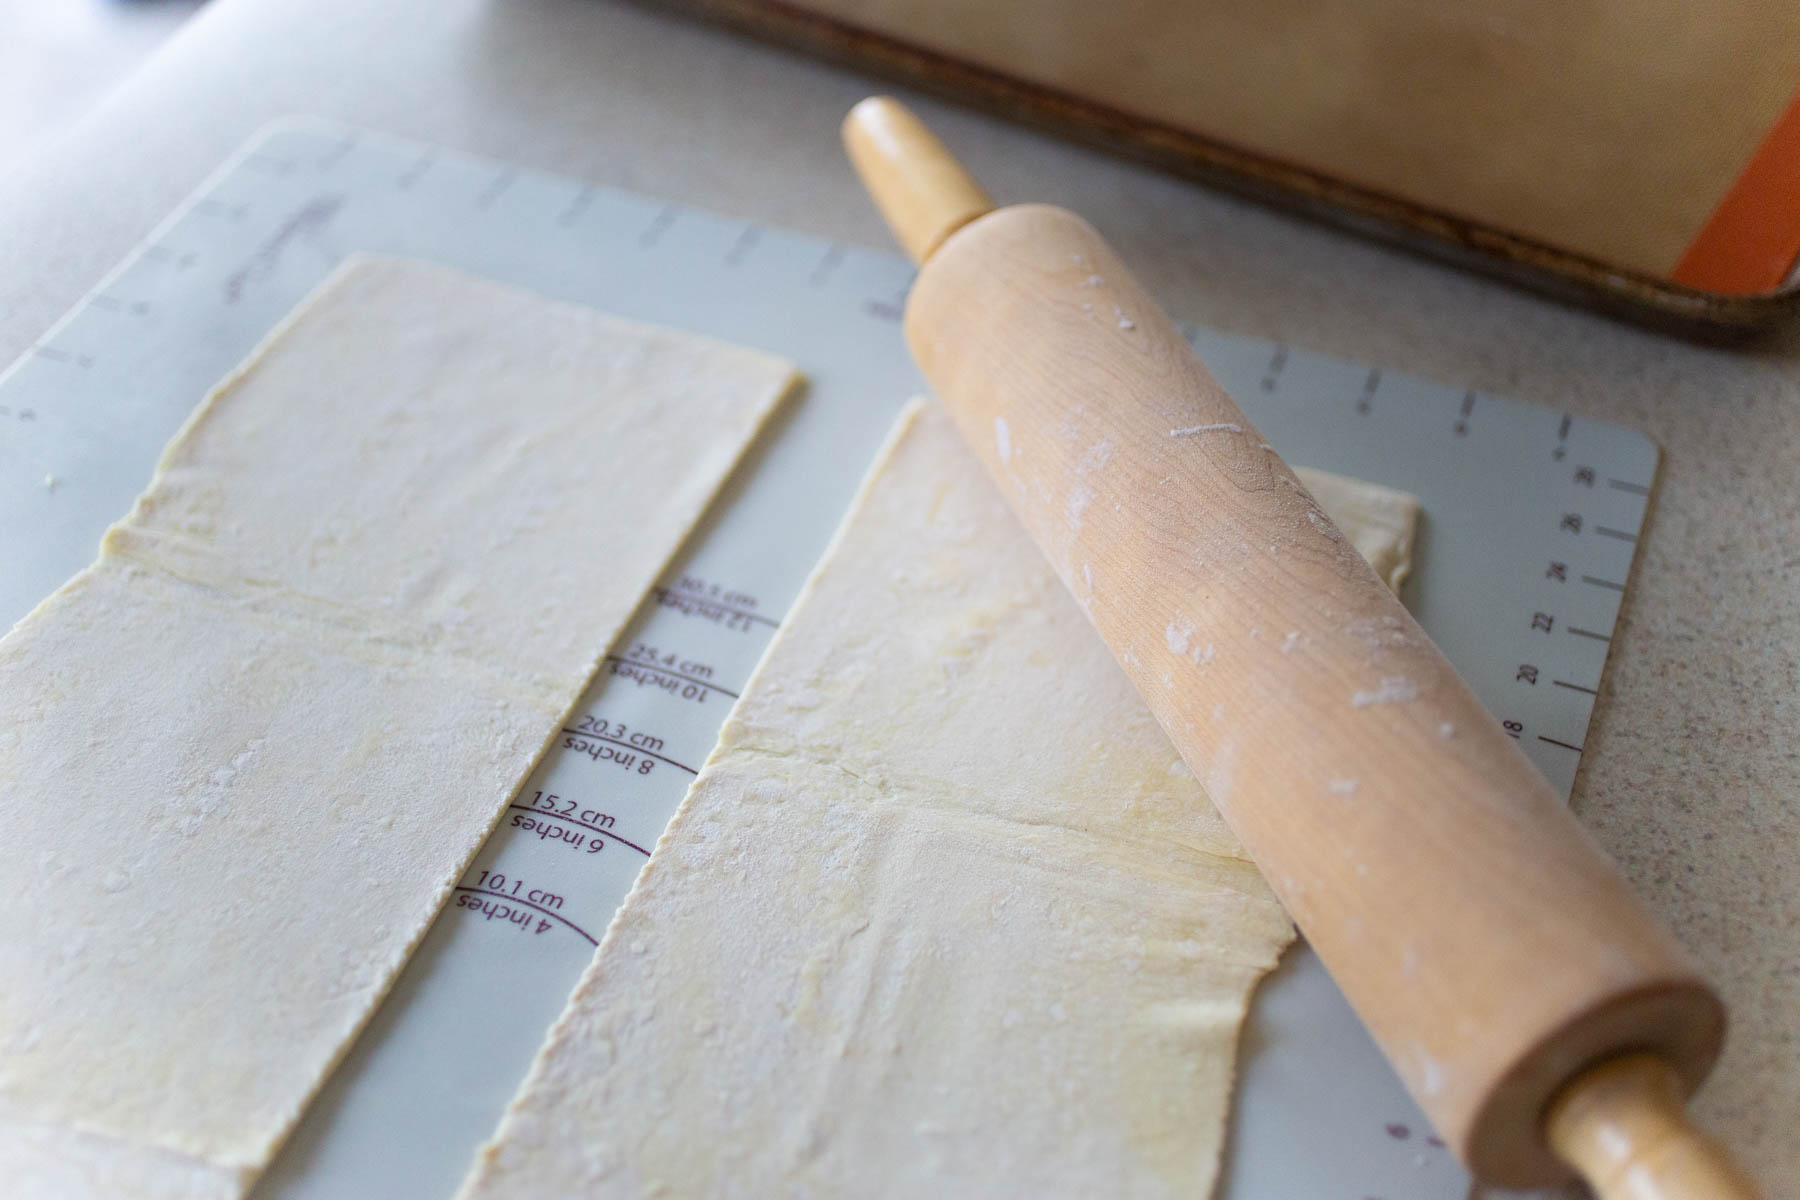 The dough has been rolled by a rolling pin on a baking mat.